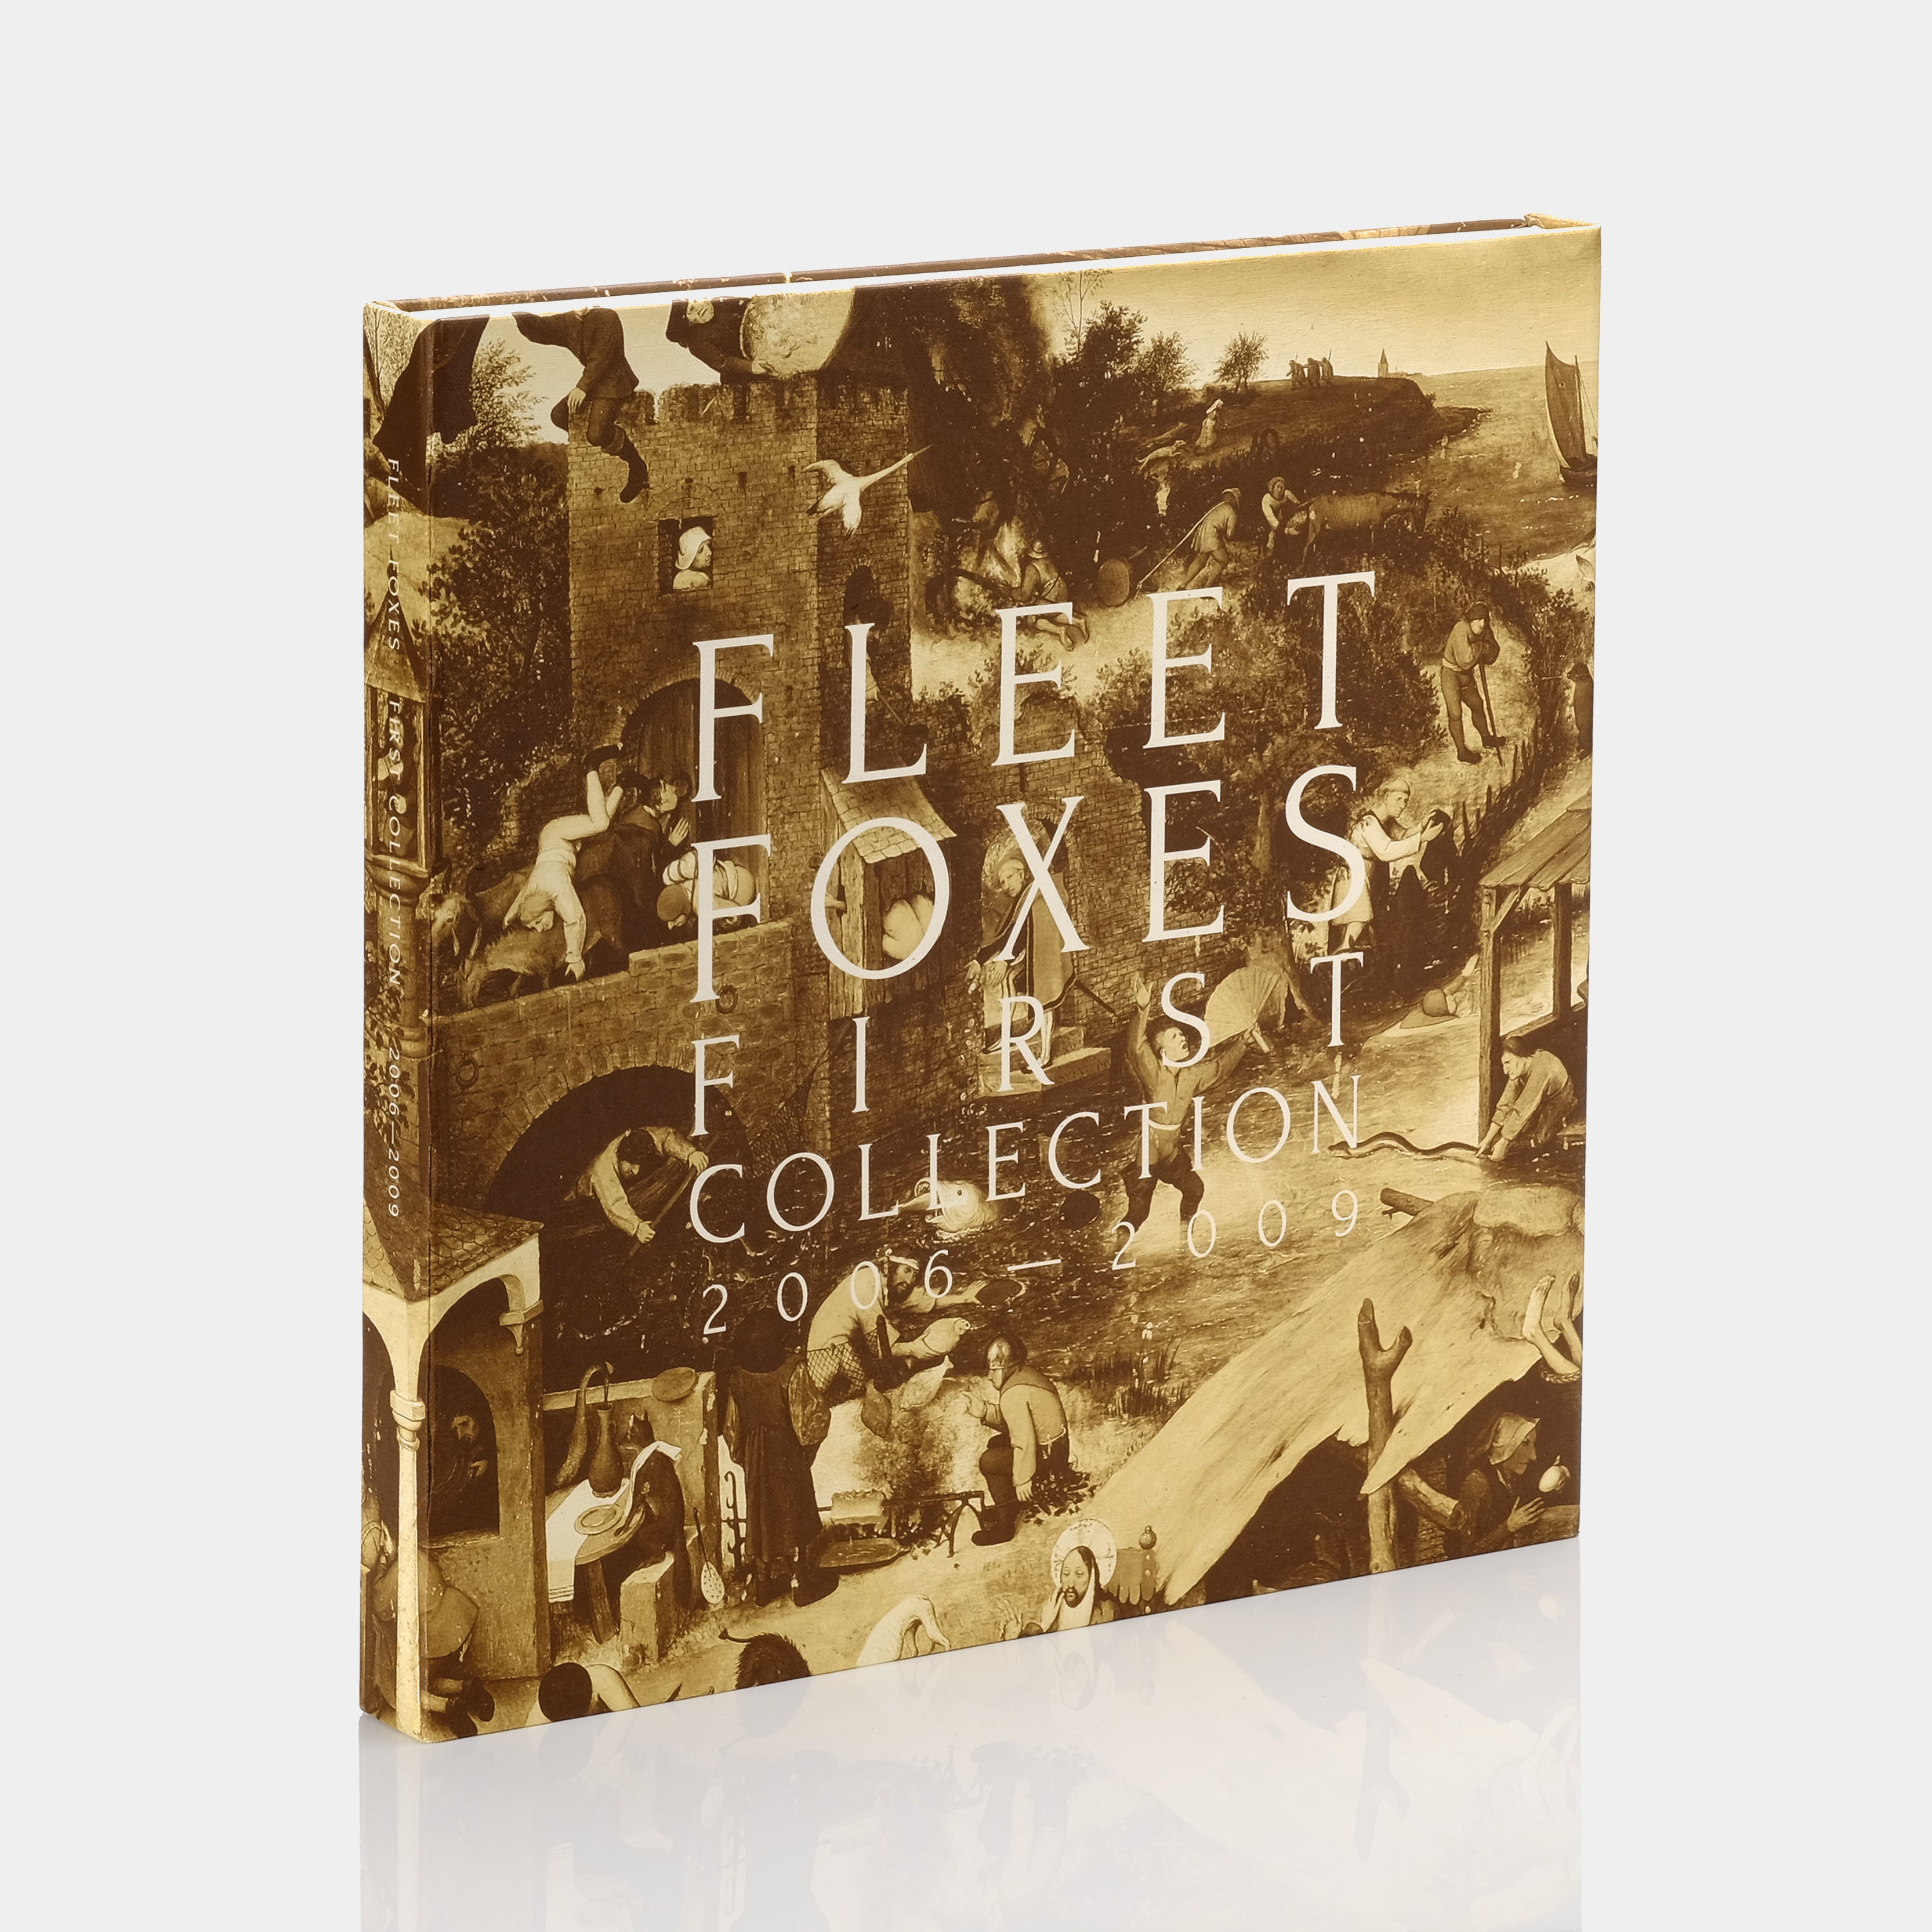 Fleet Foxes - First Collection 2006-2009 LP Vinyl Record + 3x10" EP